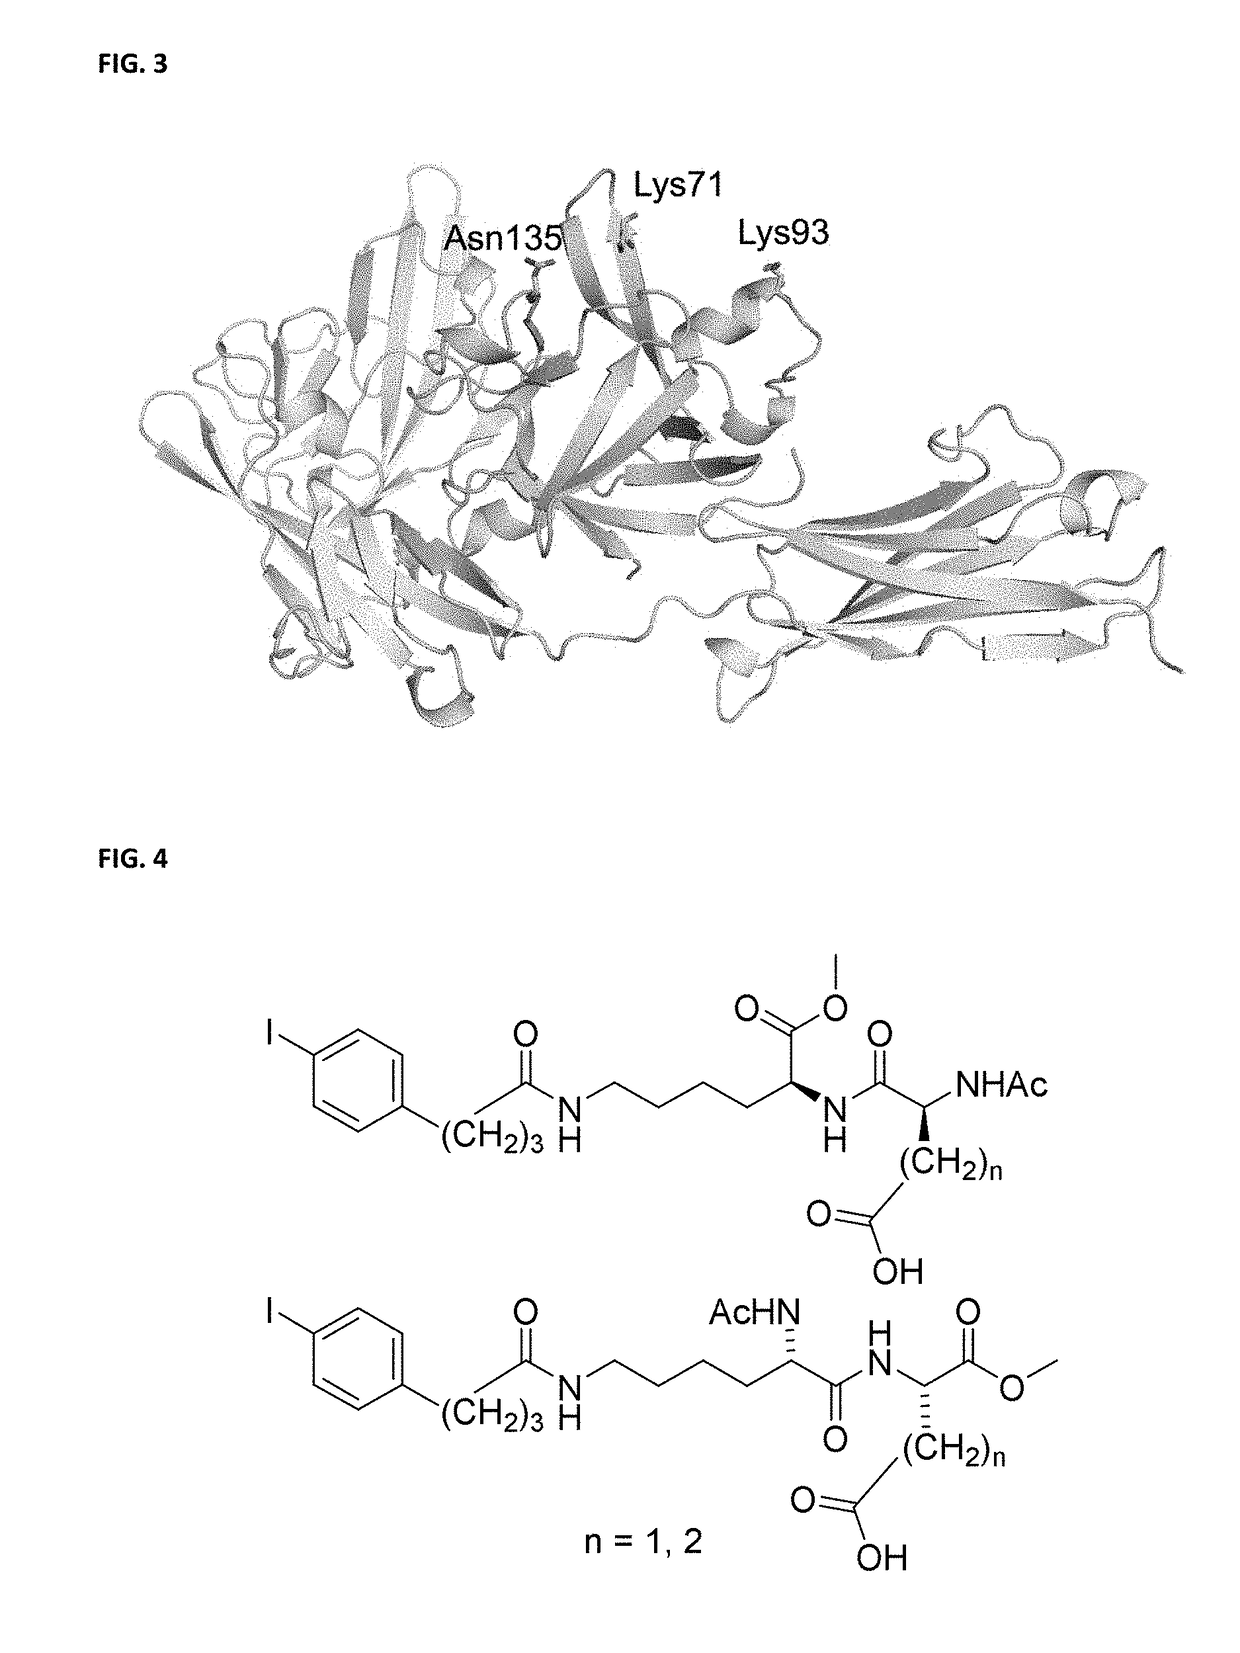 Functionally modified polypeptides and radiobiosynthesis